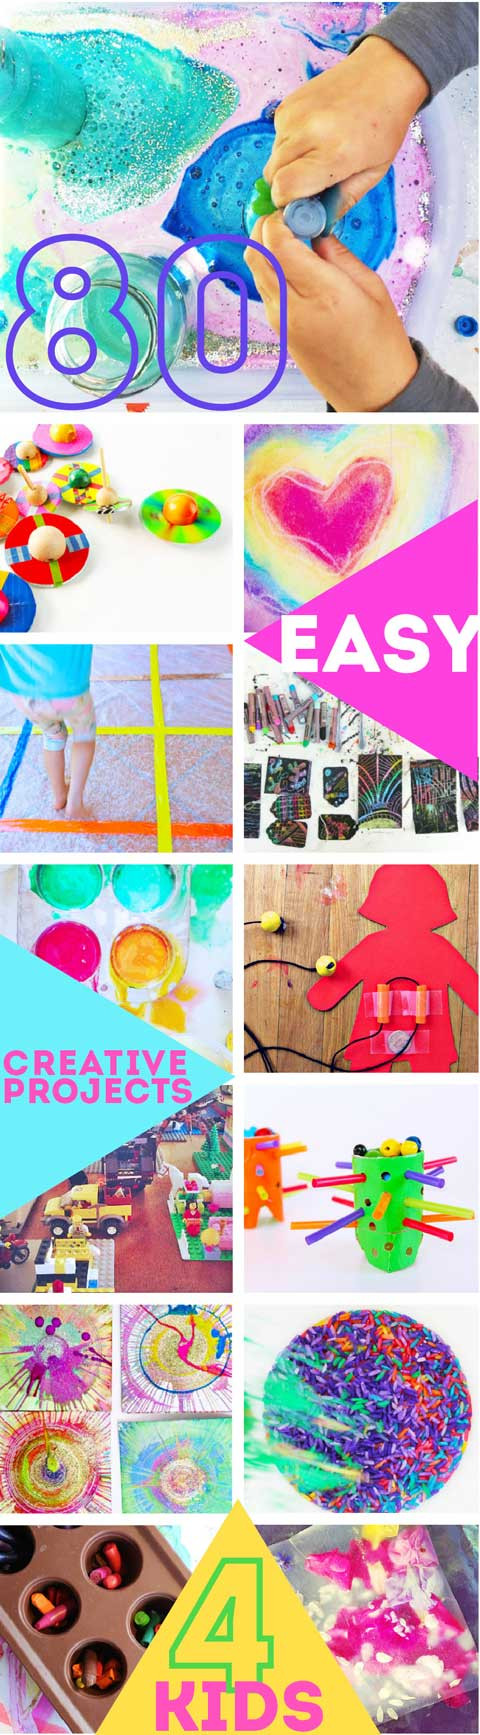 Creative Project For Kids
 80 Easy Creative Projects for Kids Babble Dabble Do